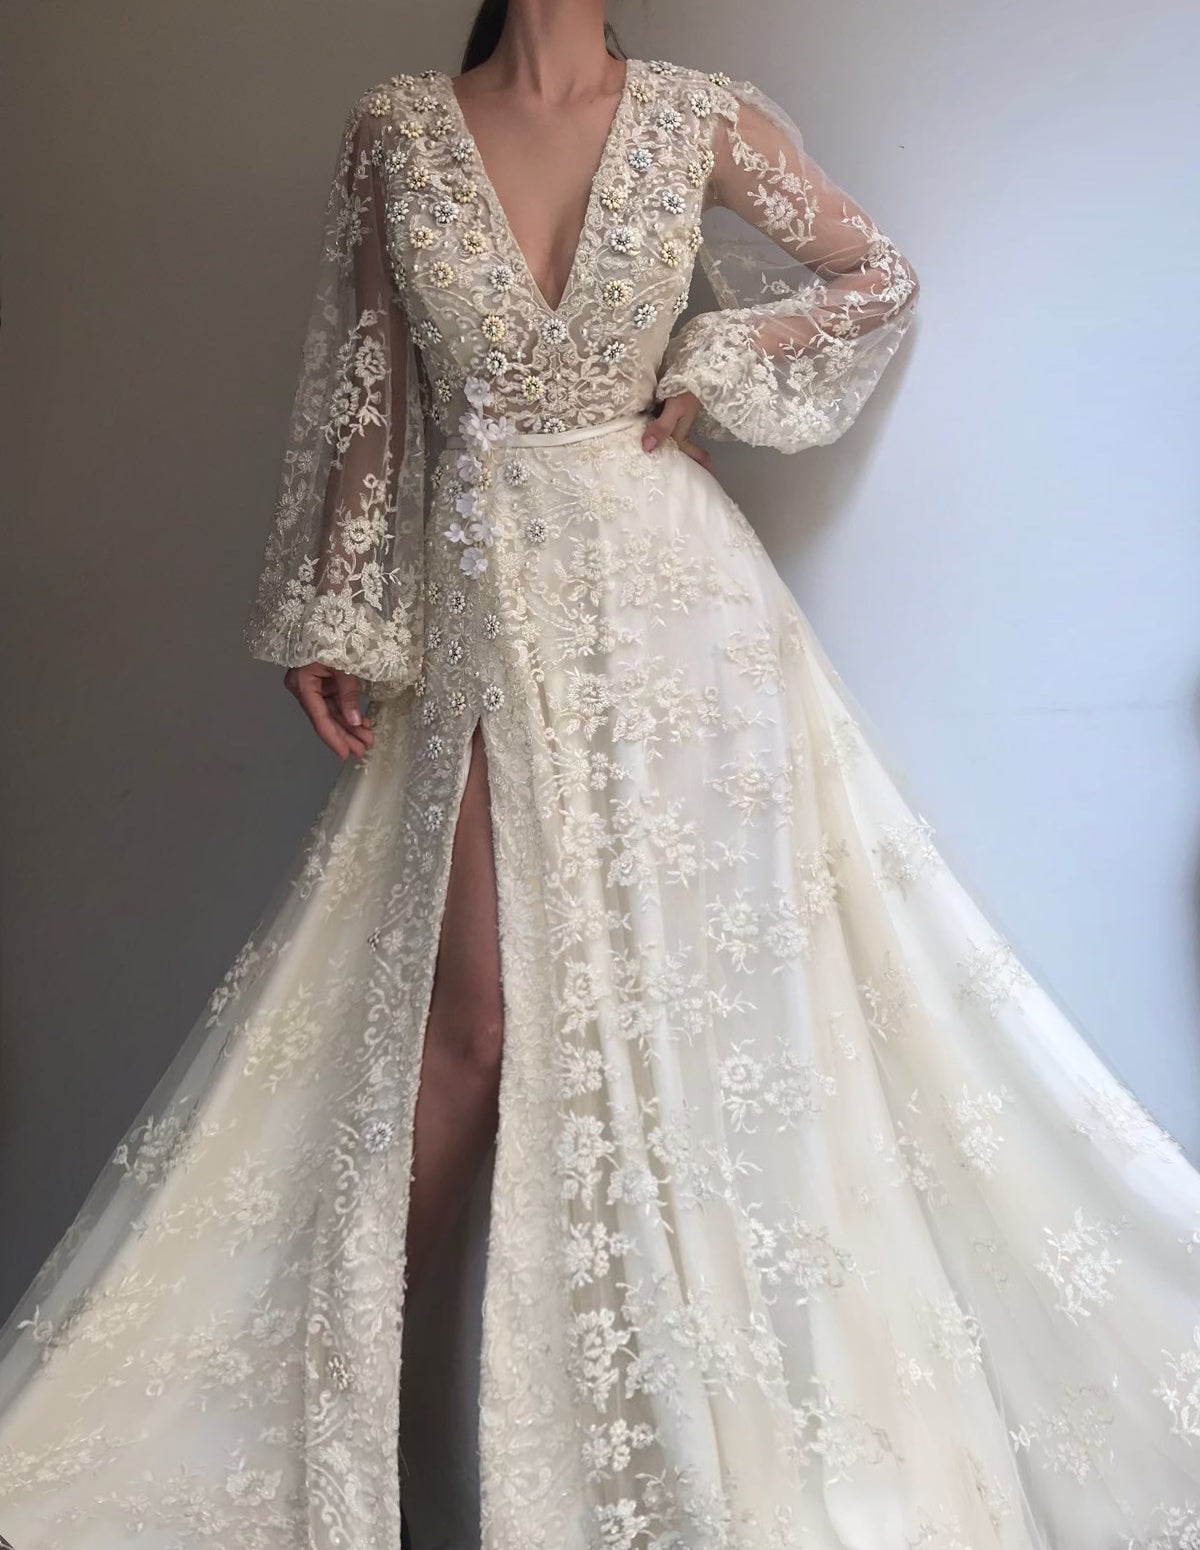 White A-Line dress with v-neck, long sleeves, lace and embroidery